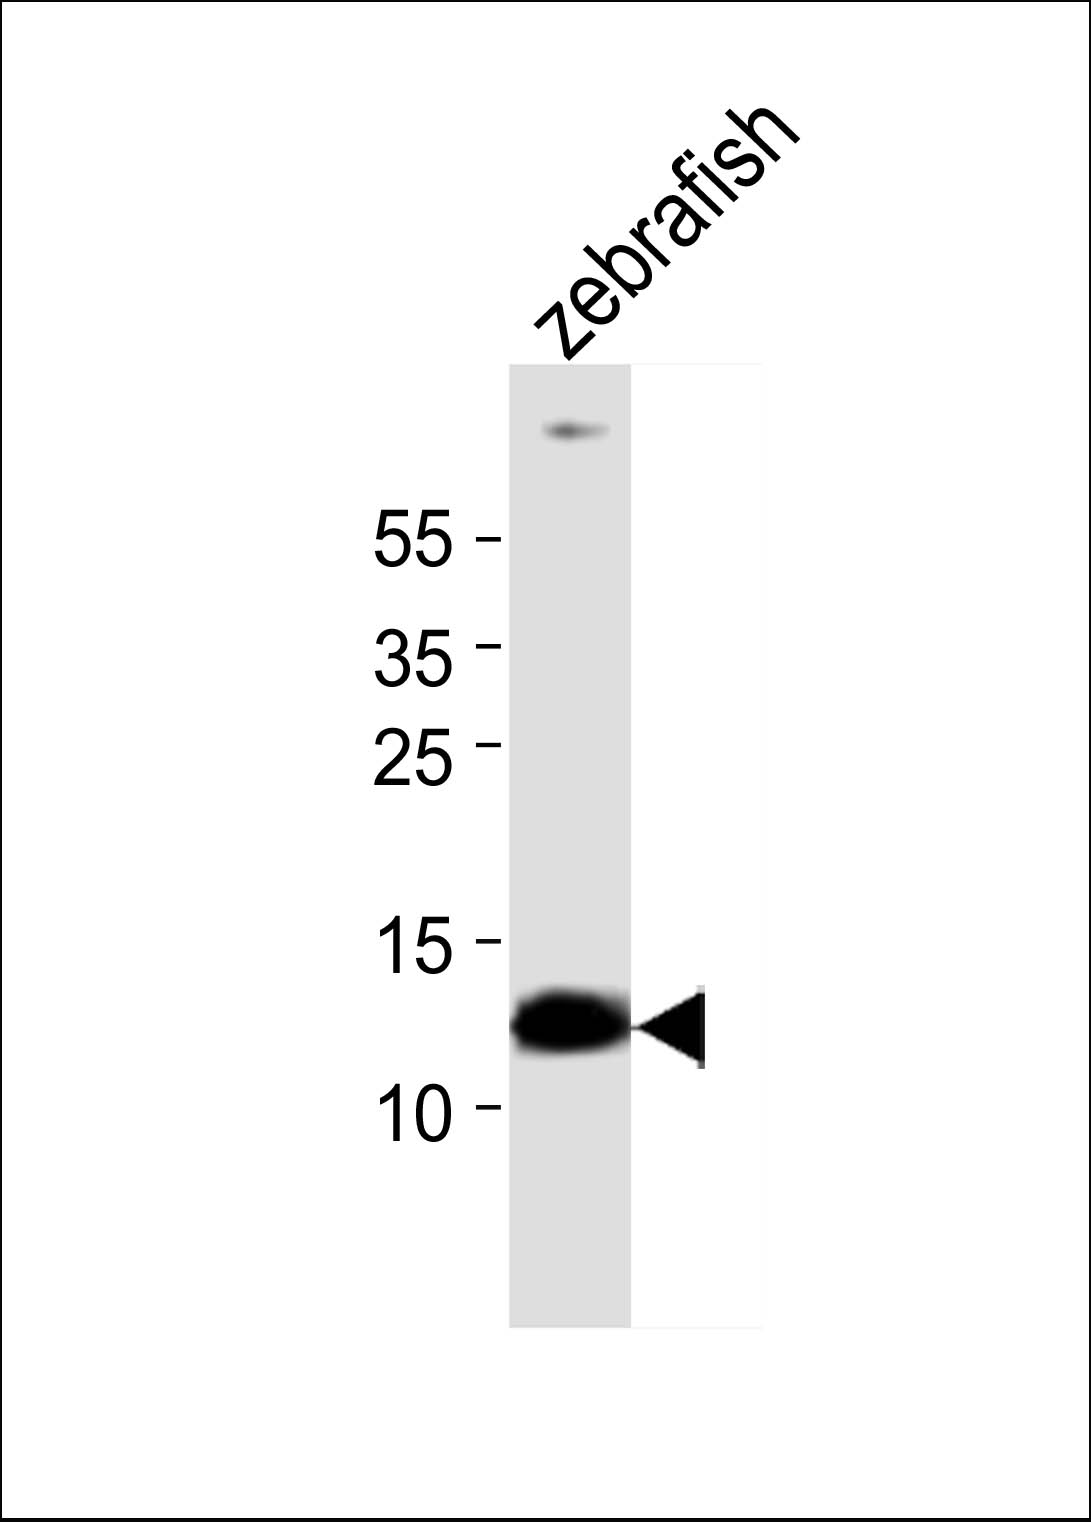 Western blot analysis of lysate from zebrafish tissue,  using (DANRE) ba1 Antibody (Center)(Cat.  #AP20955a).  AP20955a was diluted at 1:1000.  A goat anti-rabbit IgG H&L(HRP) at 1:10000 dilution was used as the secondary antibody. Lysate at 5ug.